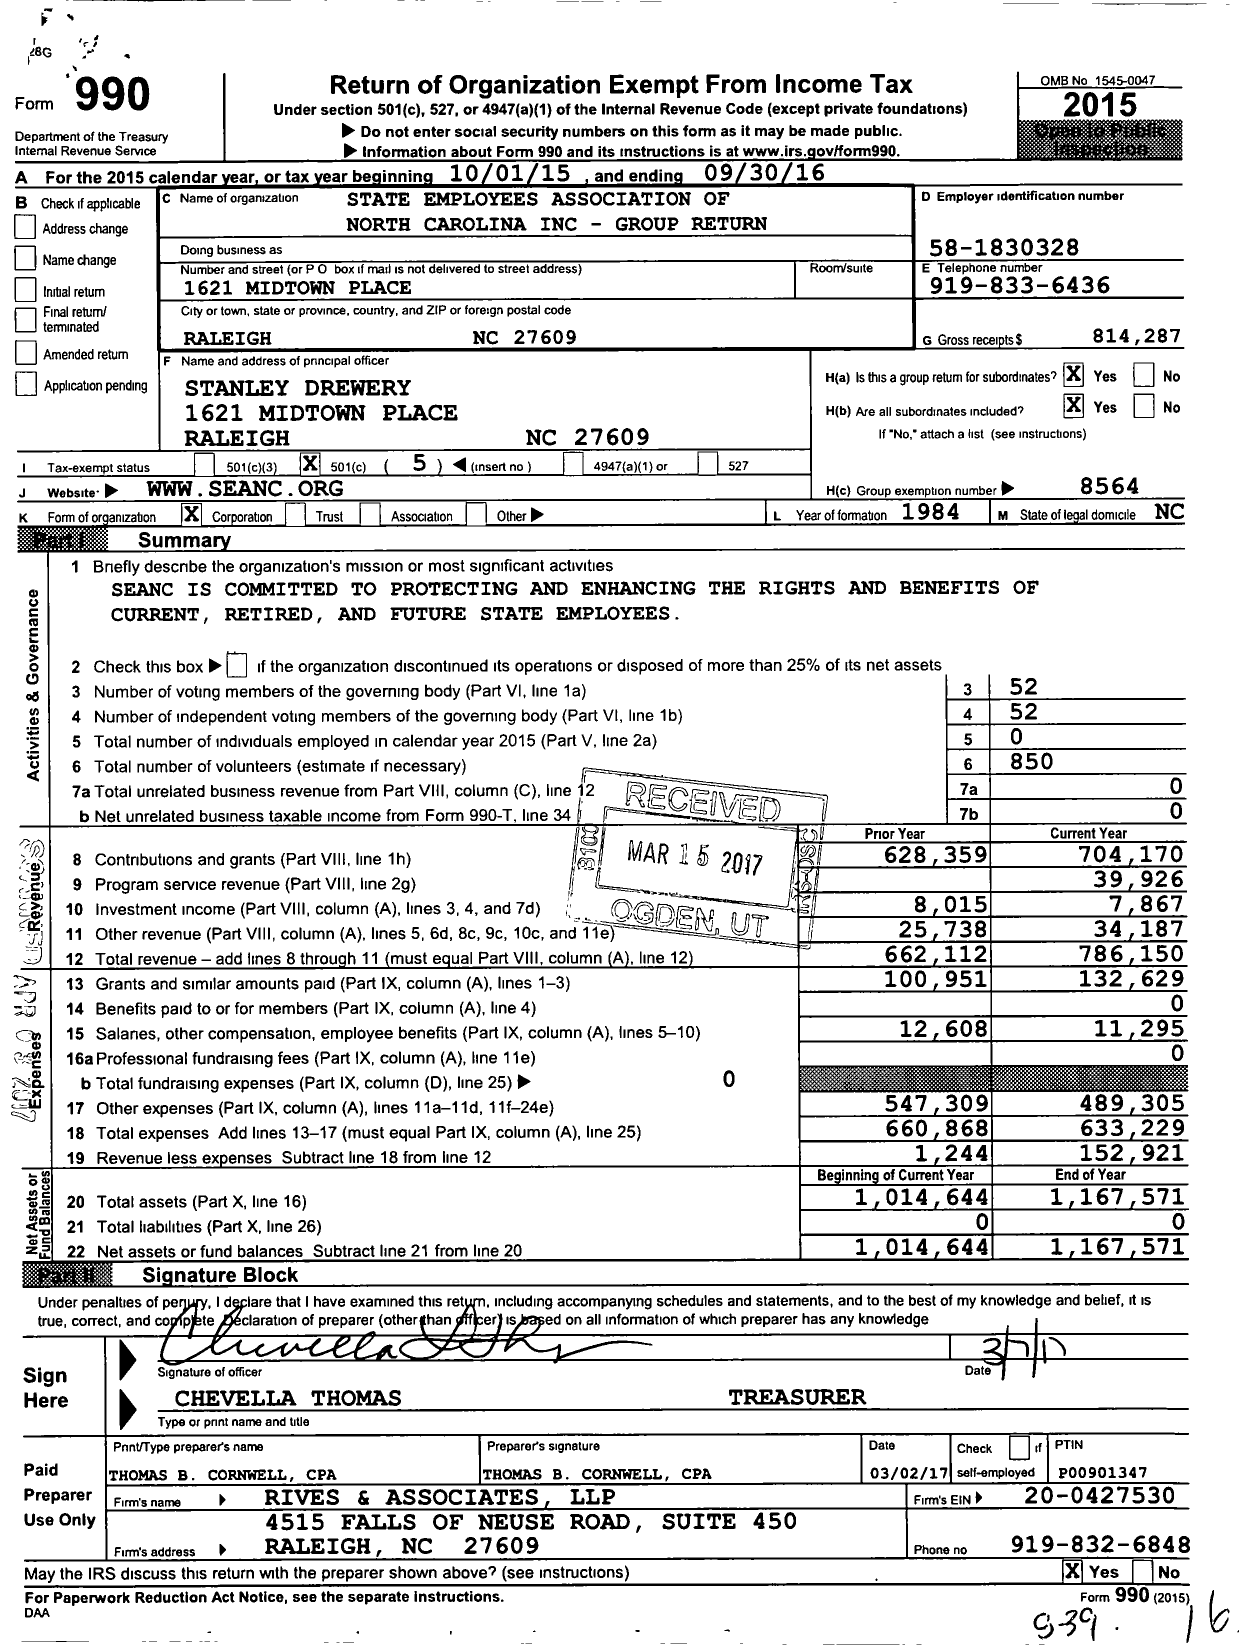 Image of first page of 2015 Form 990O for State Employees Association of North Carolina Inc - Group Return